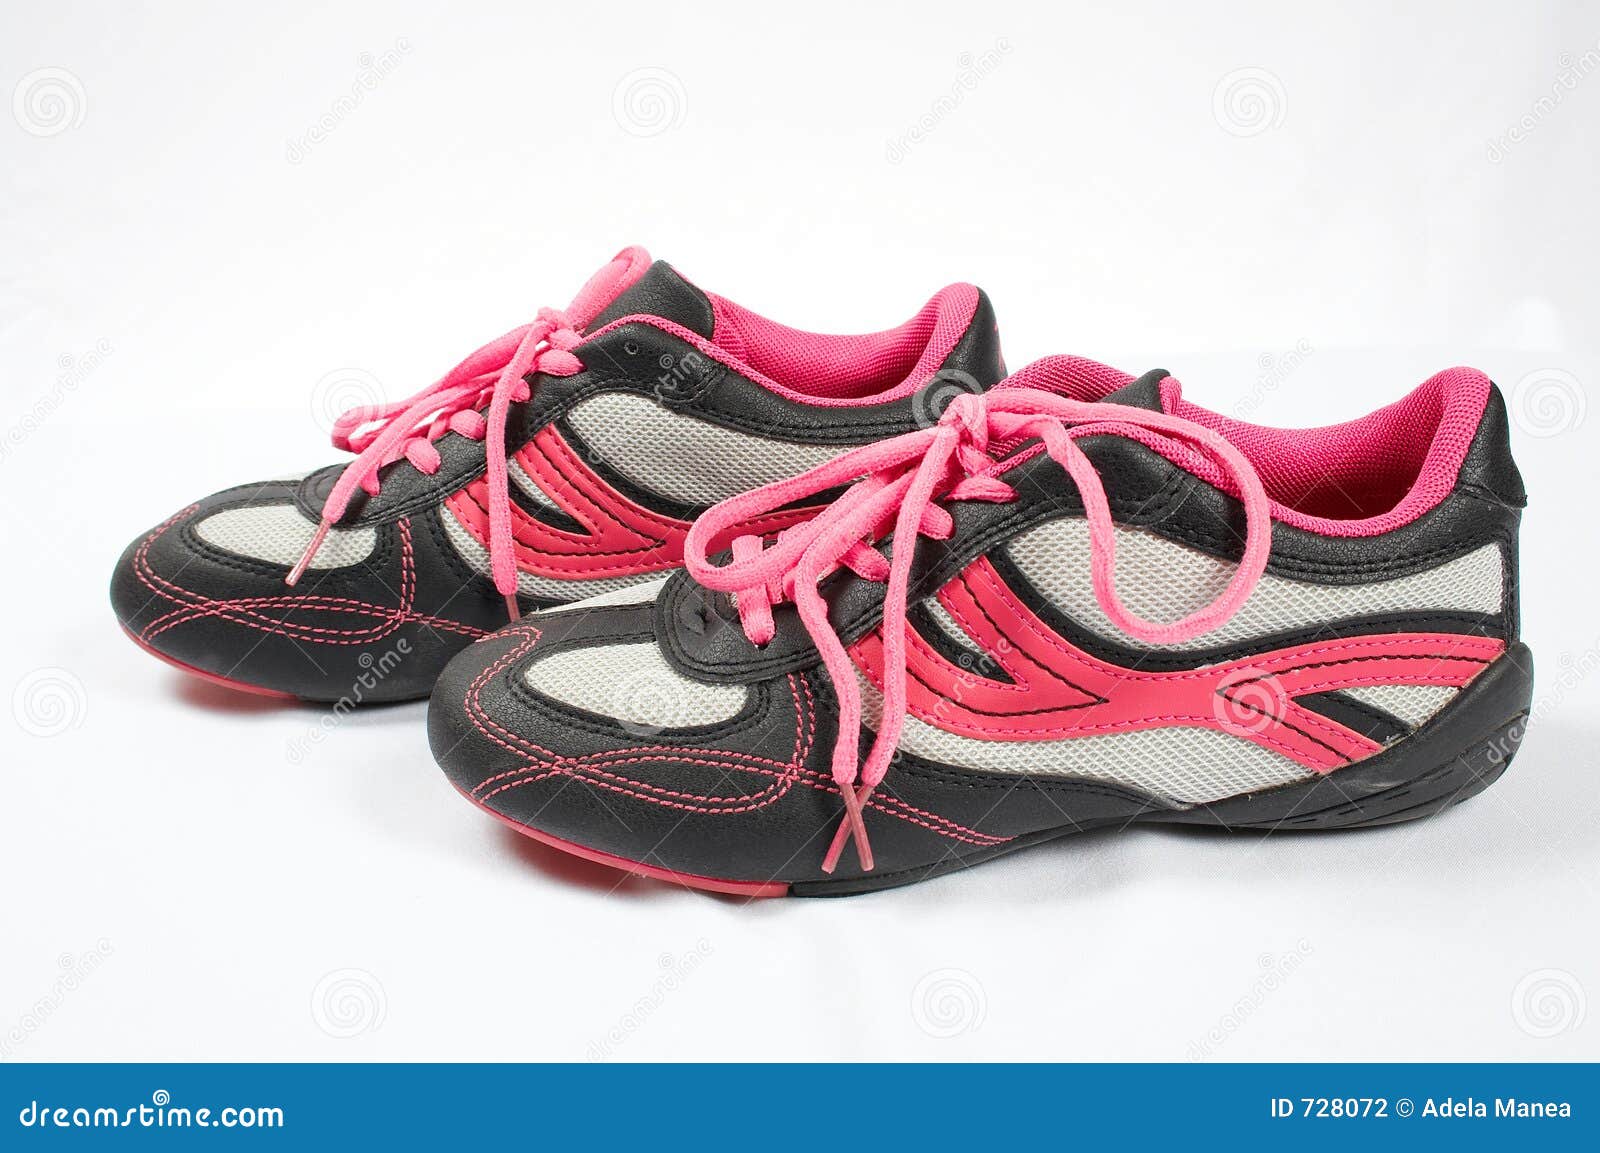 Sport shoes 06 stock photo. Image of footwear, object, sports - 728072